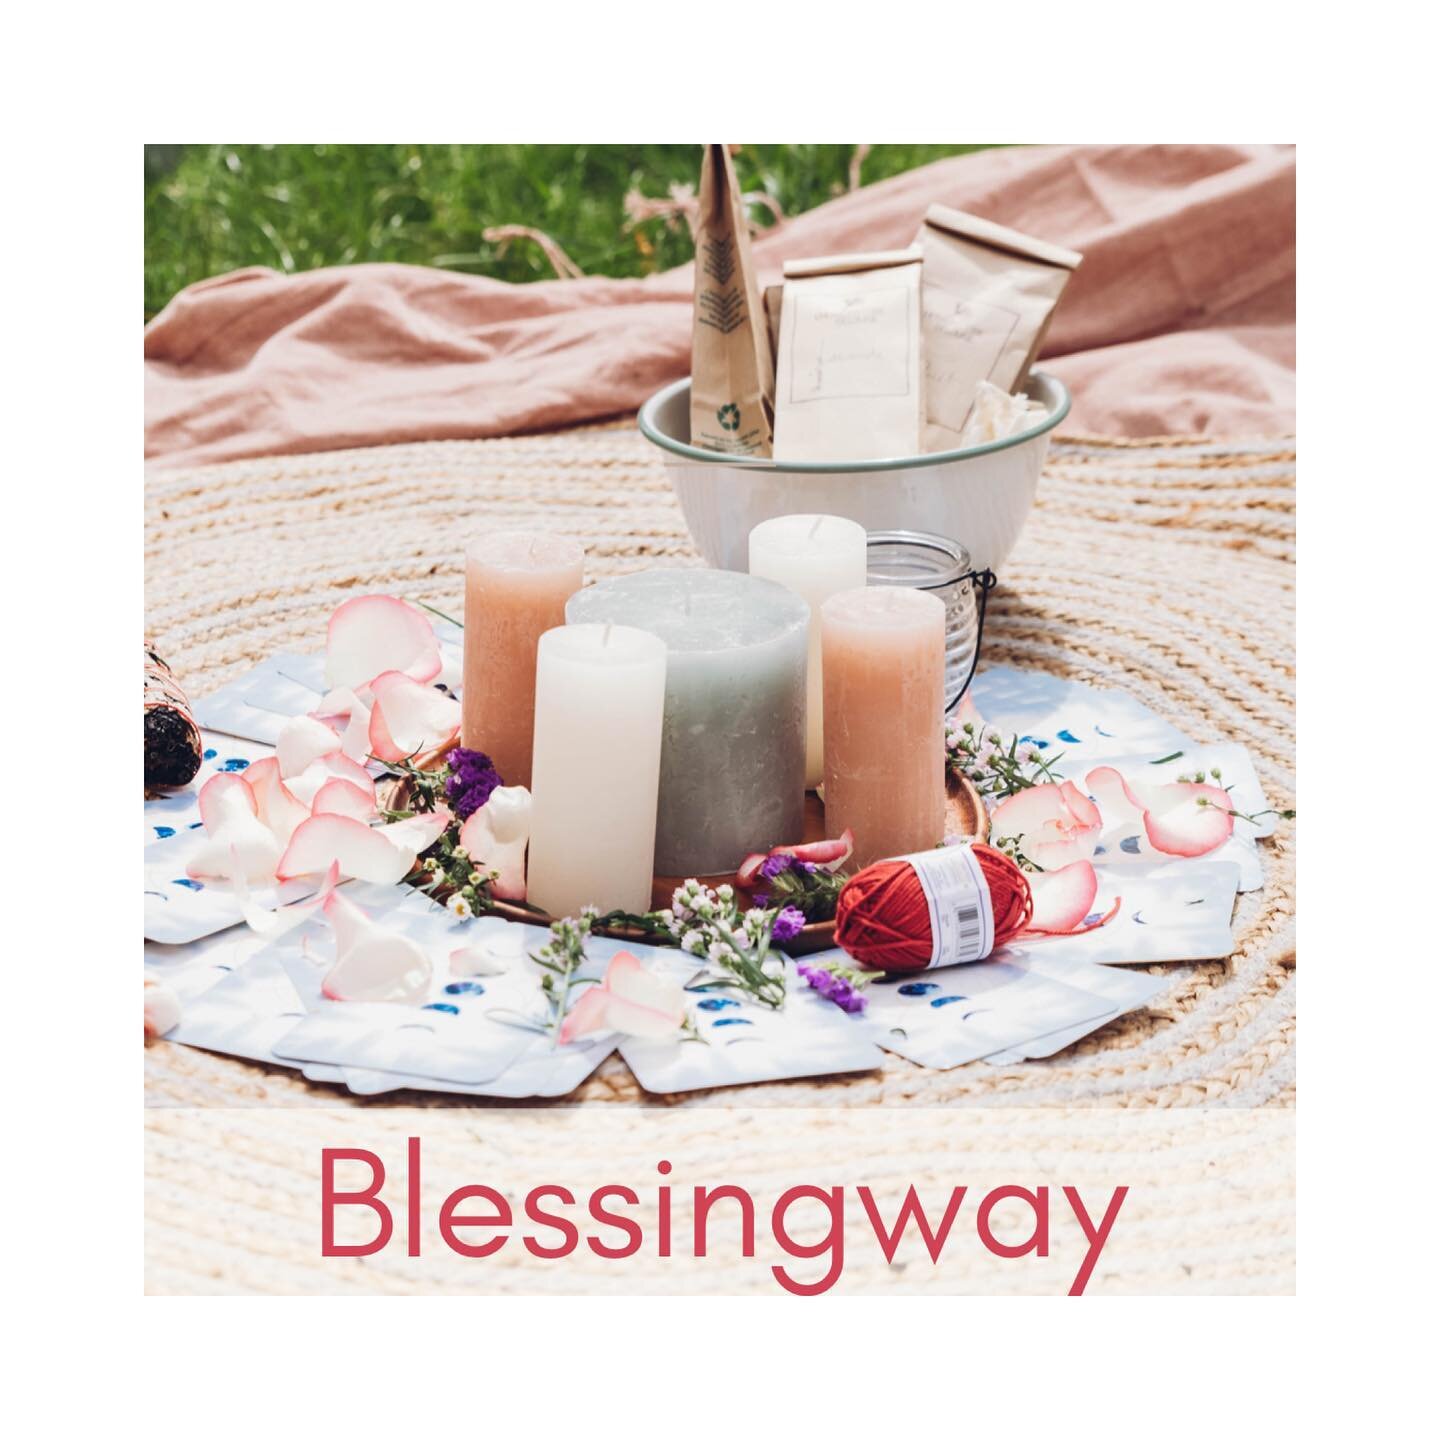 Last week I had the pleasure to organize a Blessingway and it was such a beautiful experience sharing that moment with the future mother and her close friends. 
.
A Blessingway is a private and spiritual ceremony that celebrates the pregnancy and the